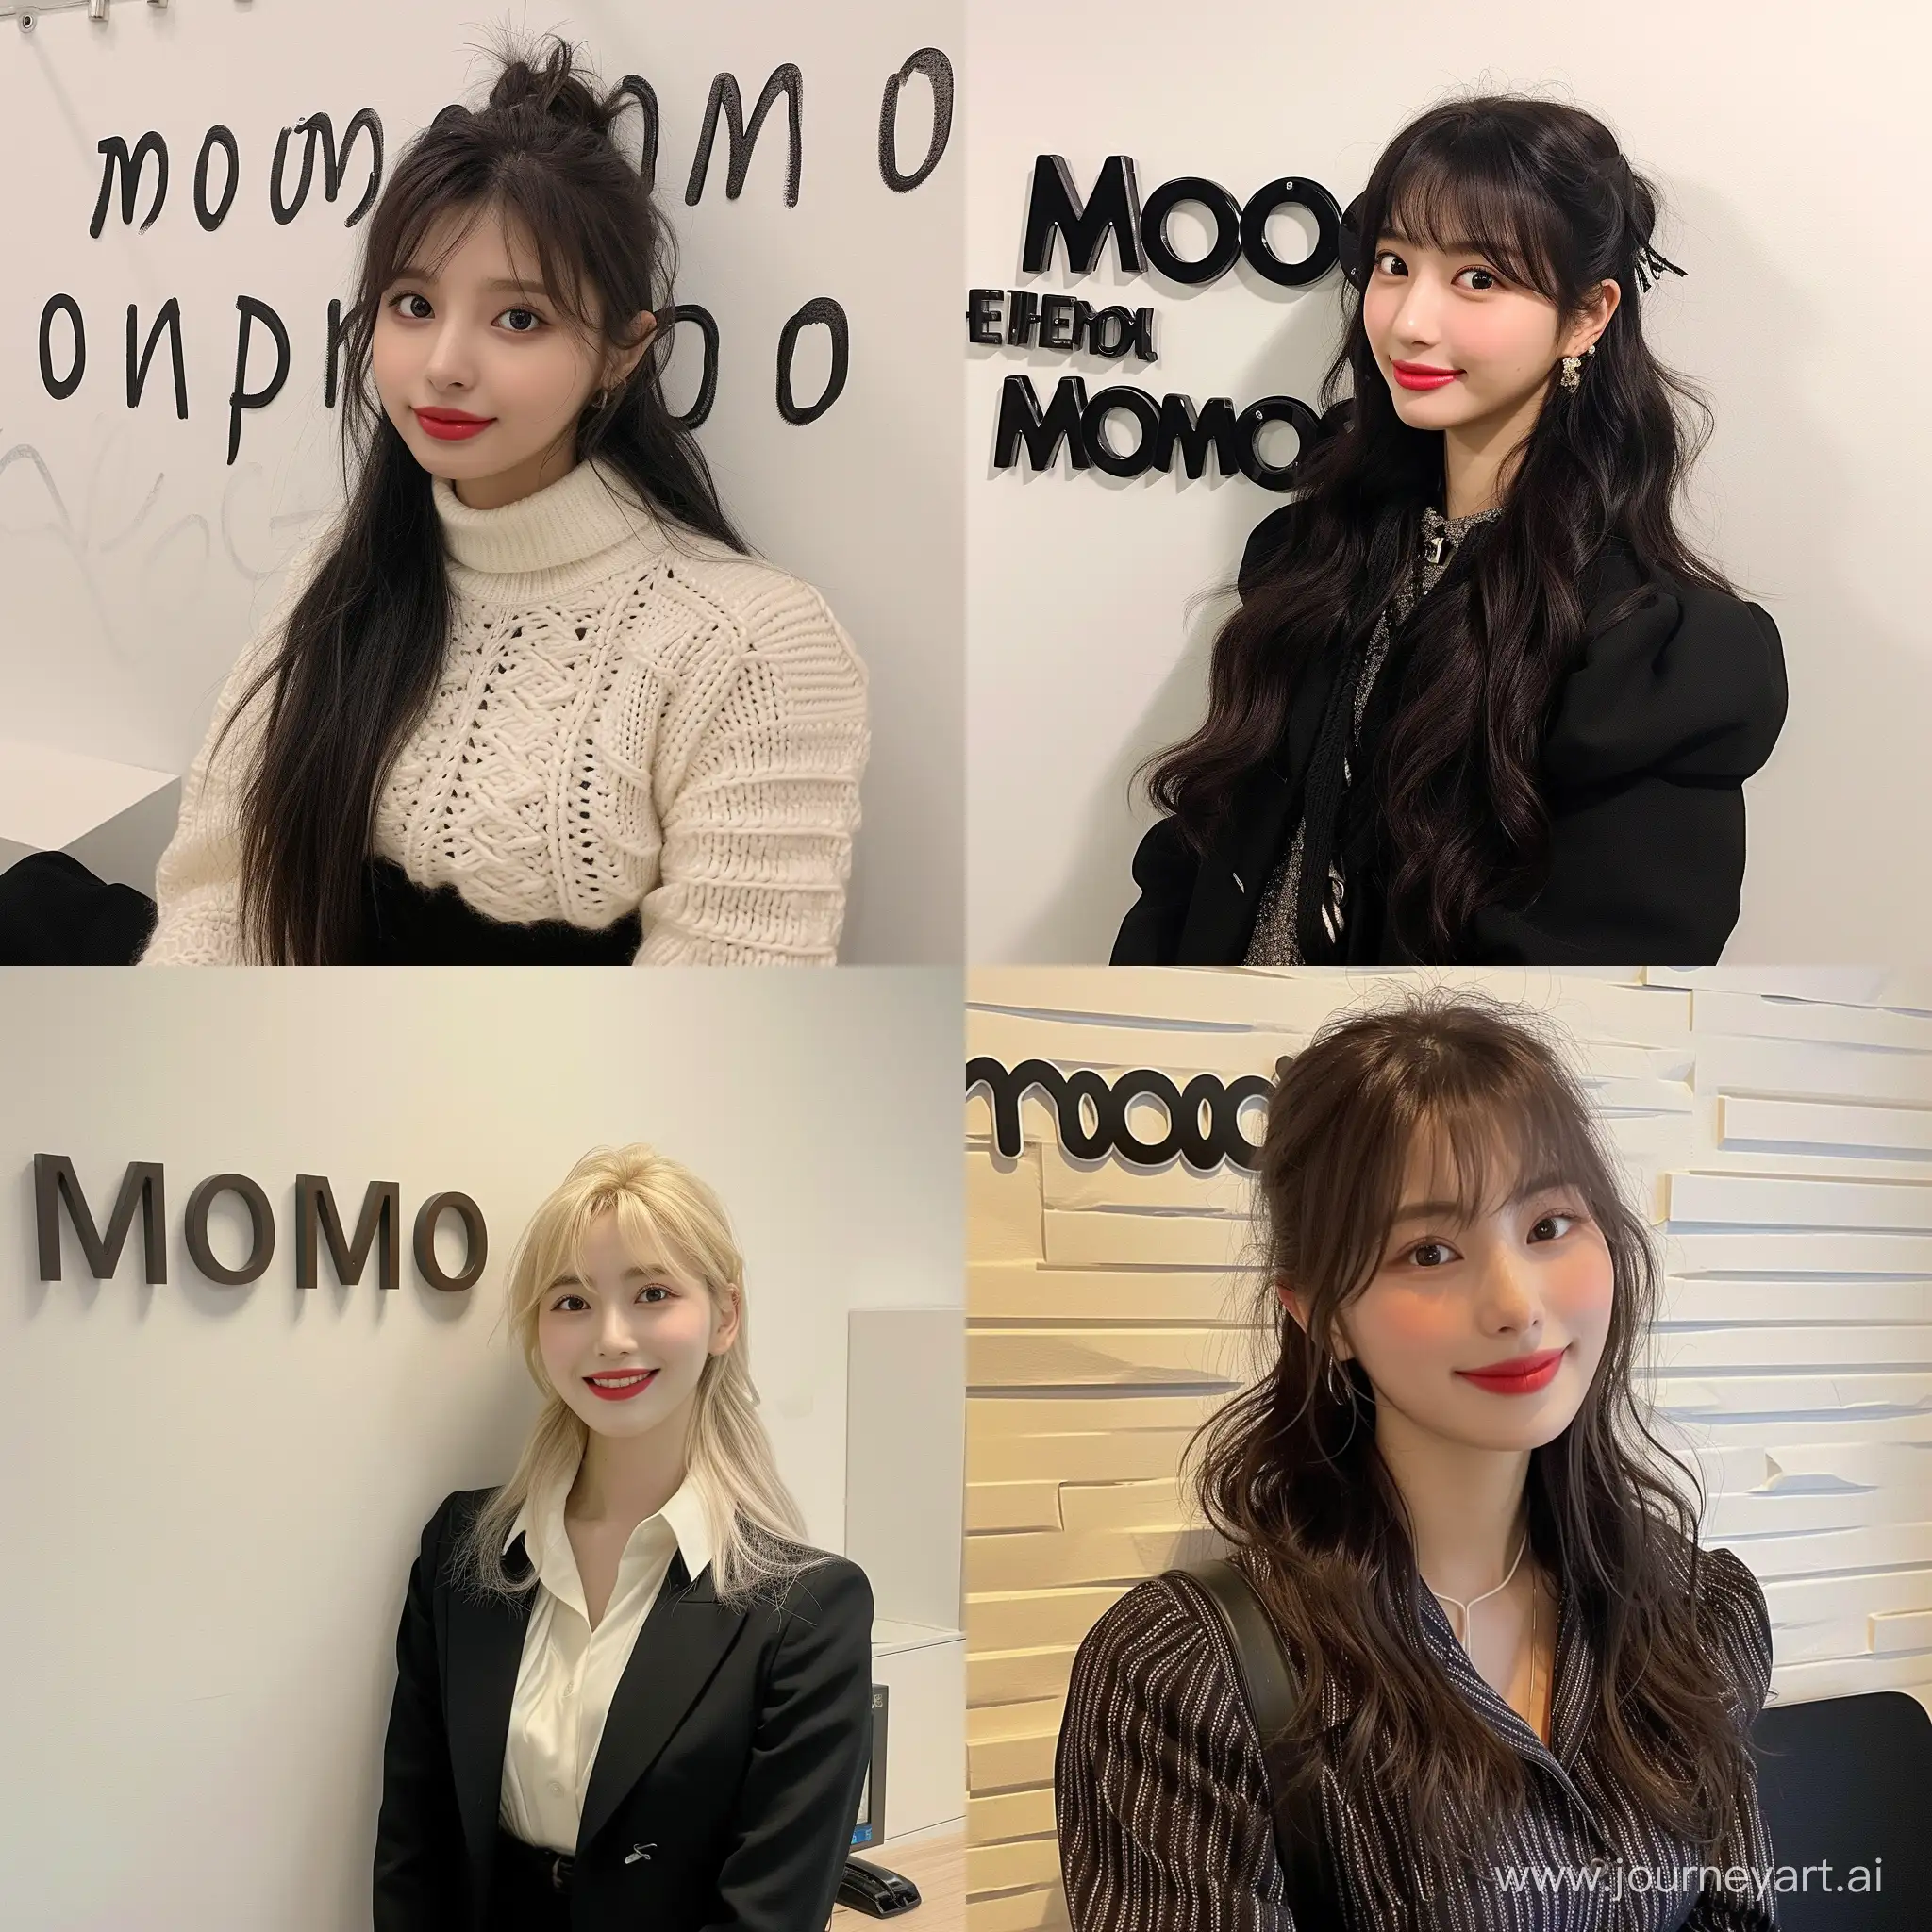 Momo, member of kpop group twice in office with "Momo Entertainment"  Plastic letters Written  on a wall in office costume 